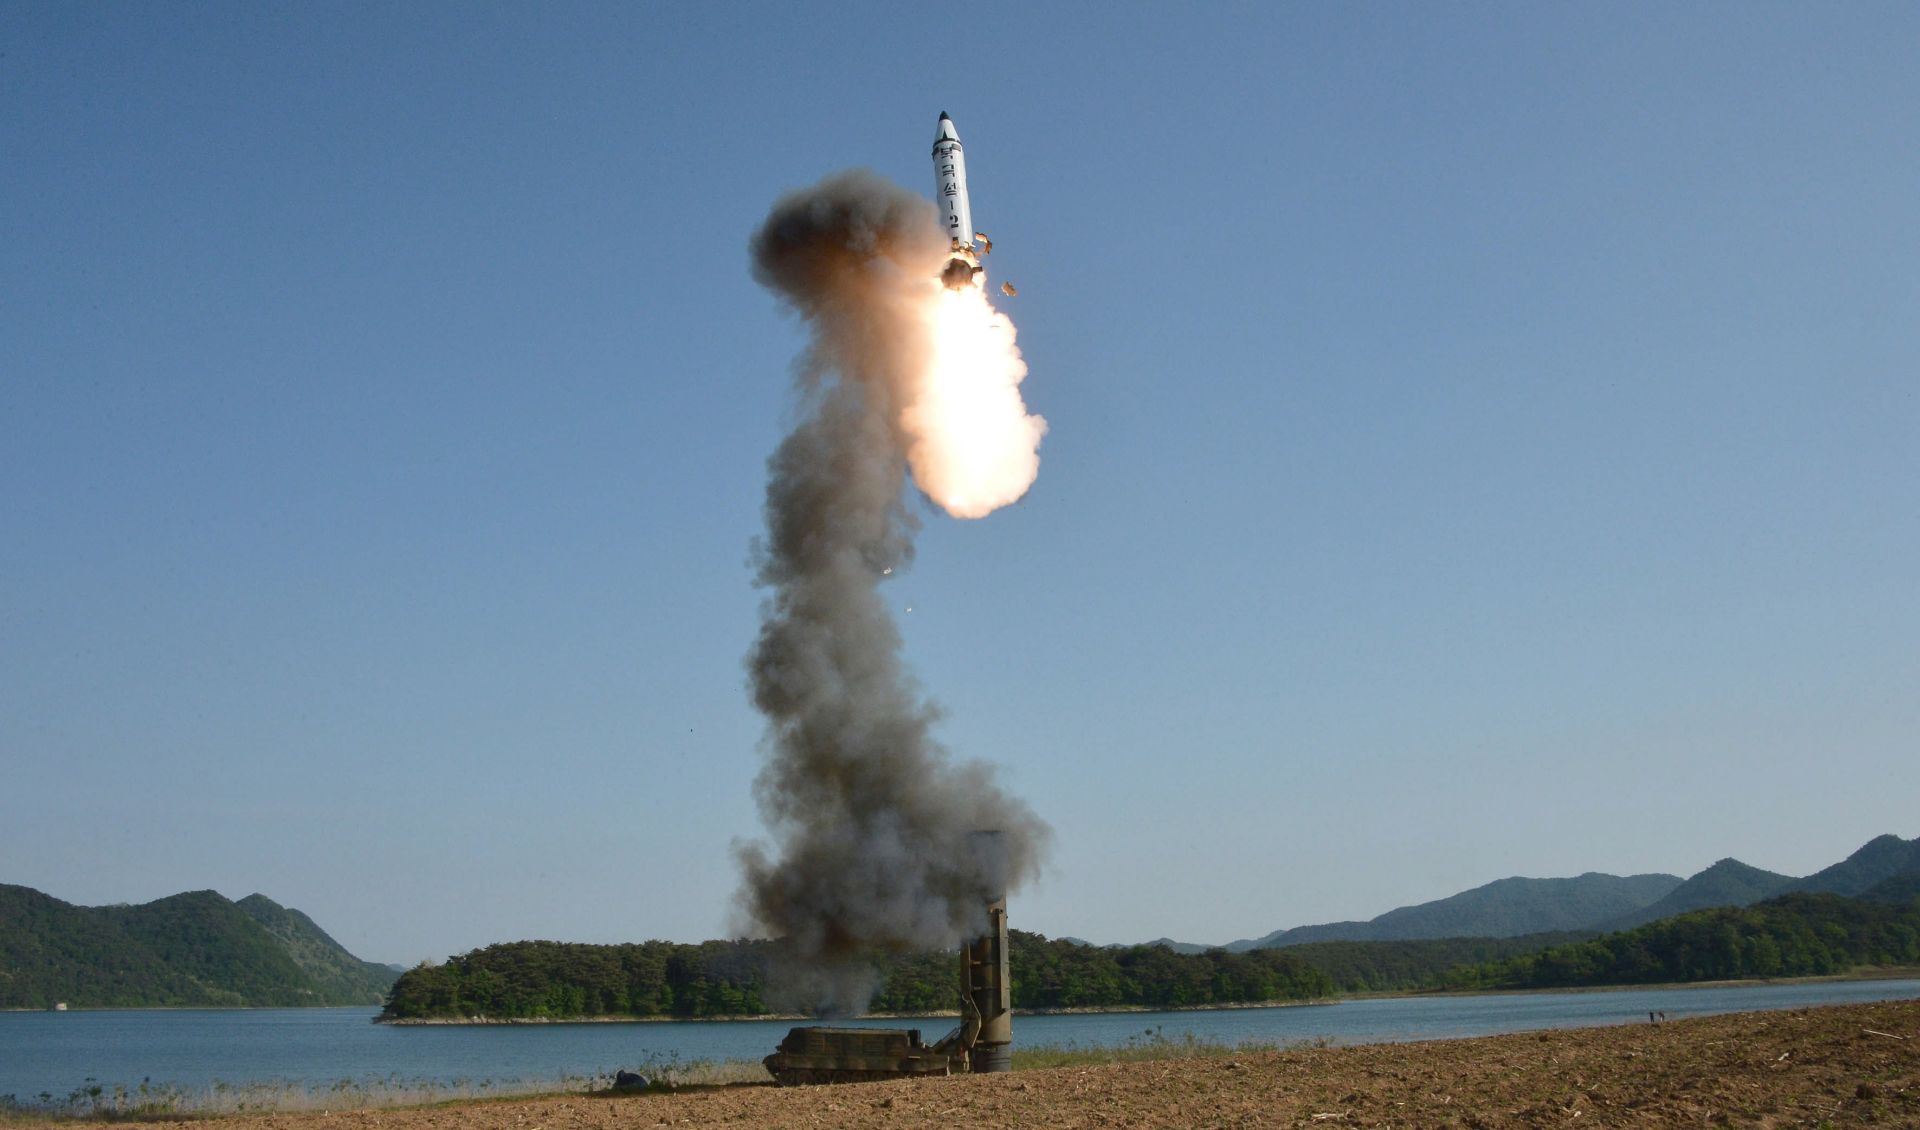 epa05981199 An undated image made available by the North Korean official news agency KCNA on 22 May 2017 shows the test-fire of the ground-to-ground medium-to-long range strategic ballistic missile Pukguksong-2 at an undisclosed location in North Korea. According to South Korea's Military, North Korea launched a ballistic missile on 21 May that flew more than 500km towards the Sea of Japan, the same type of missile reportedly test-launched on 12 February. The model, a Pukguksong-2, also known as a KN-15 missile, is an upgraded version of a submarine-launched ballistic missile (SLBM) using a solid fuel engine. North Korean state media confirmed the launch as 'successful' adding that the weapon was ready to be deployed for military action, media reported.  EPA/KCNA   EDITORIAL USE ONLY